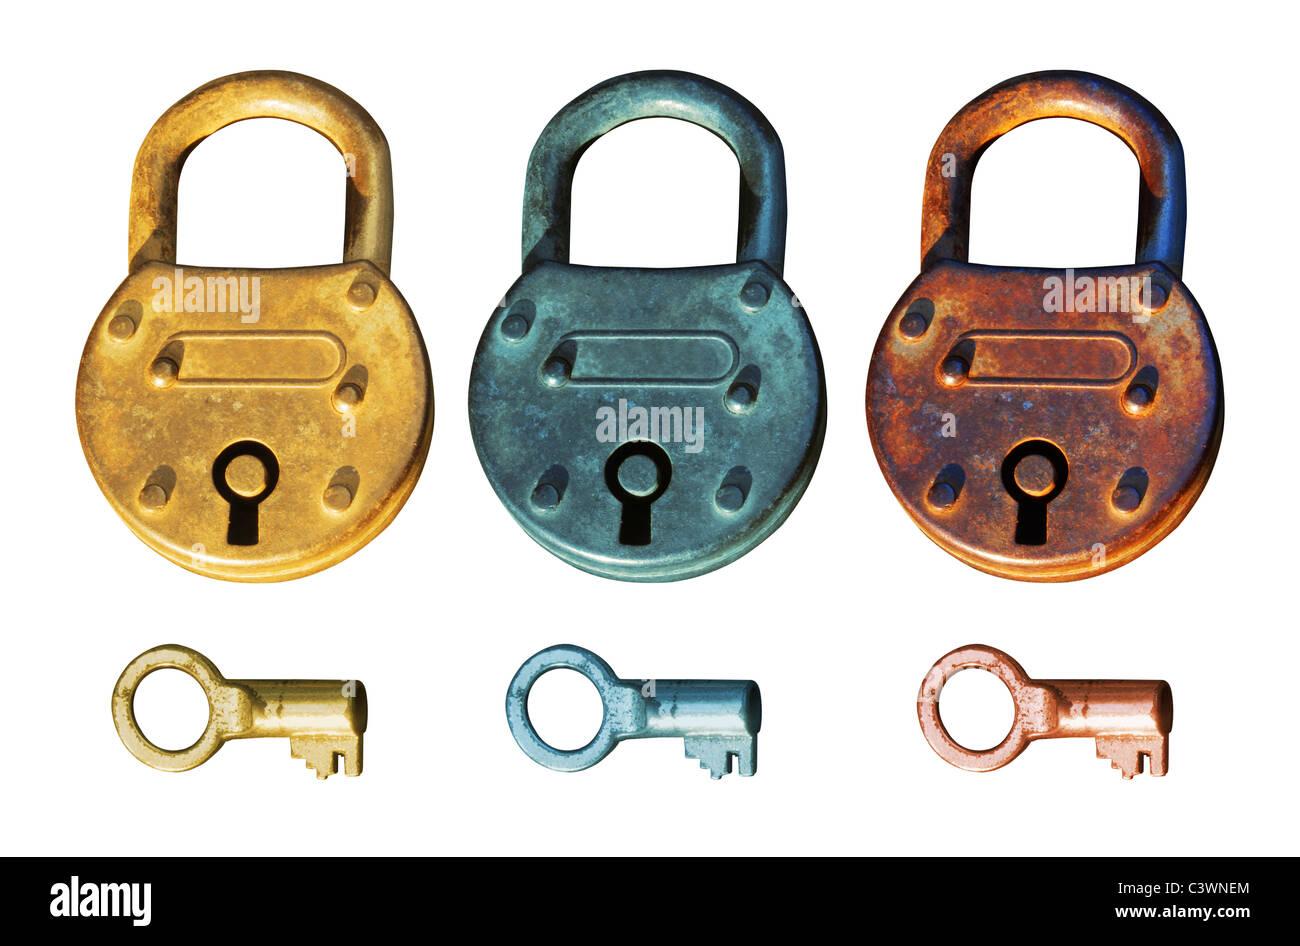 Antique Padlocks in different roughed metal surface with three key below. Isolated elements over white background. Stock Photo